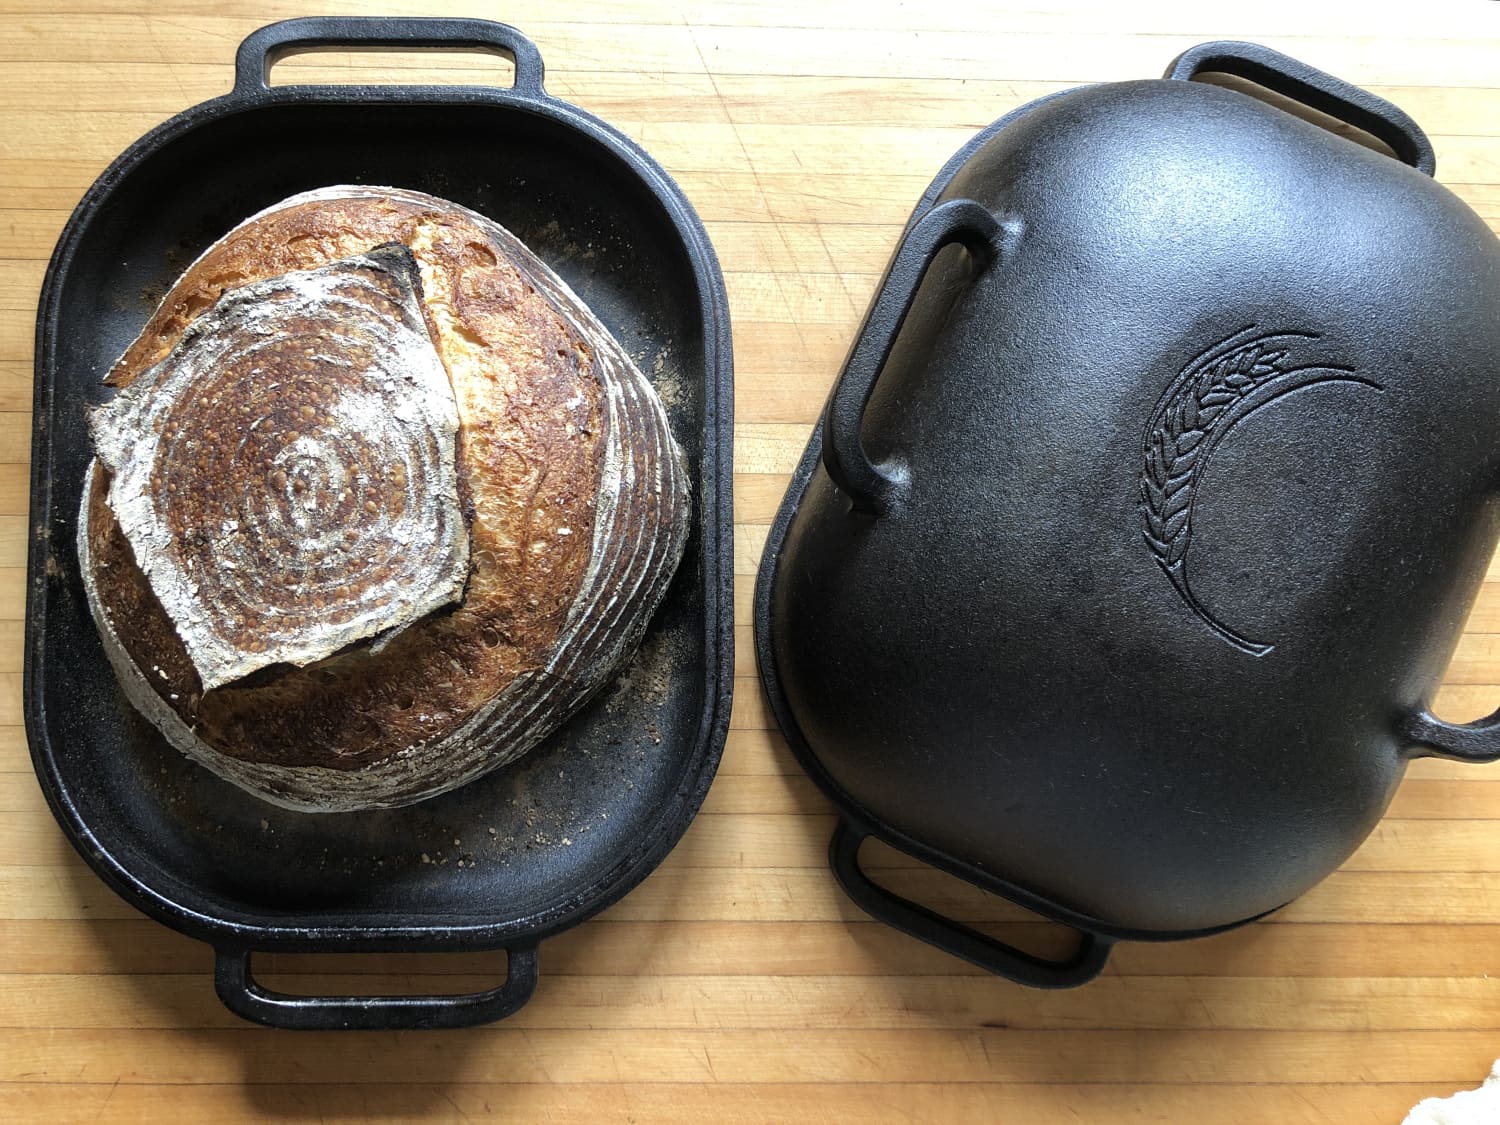 The Challenger Bread Pan – #brotokoll by Alex